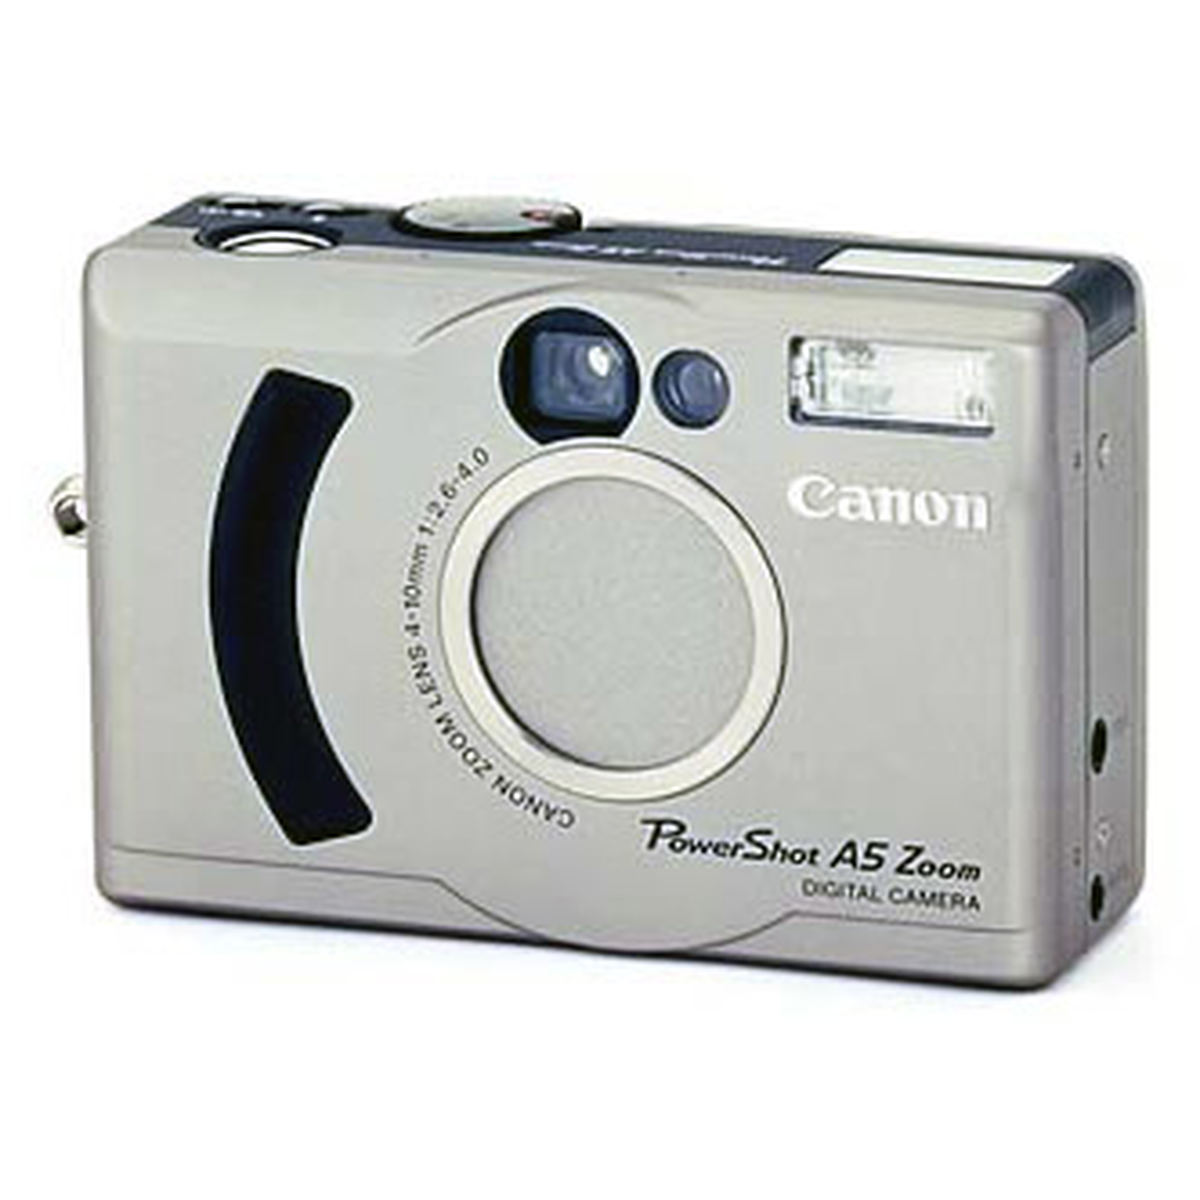 Canon PowerShot A5 Zoom : Specifications and Opinions | JuzaPhoto